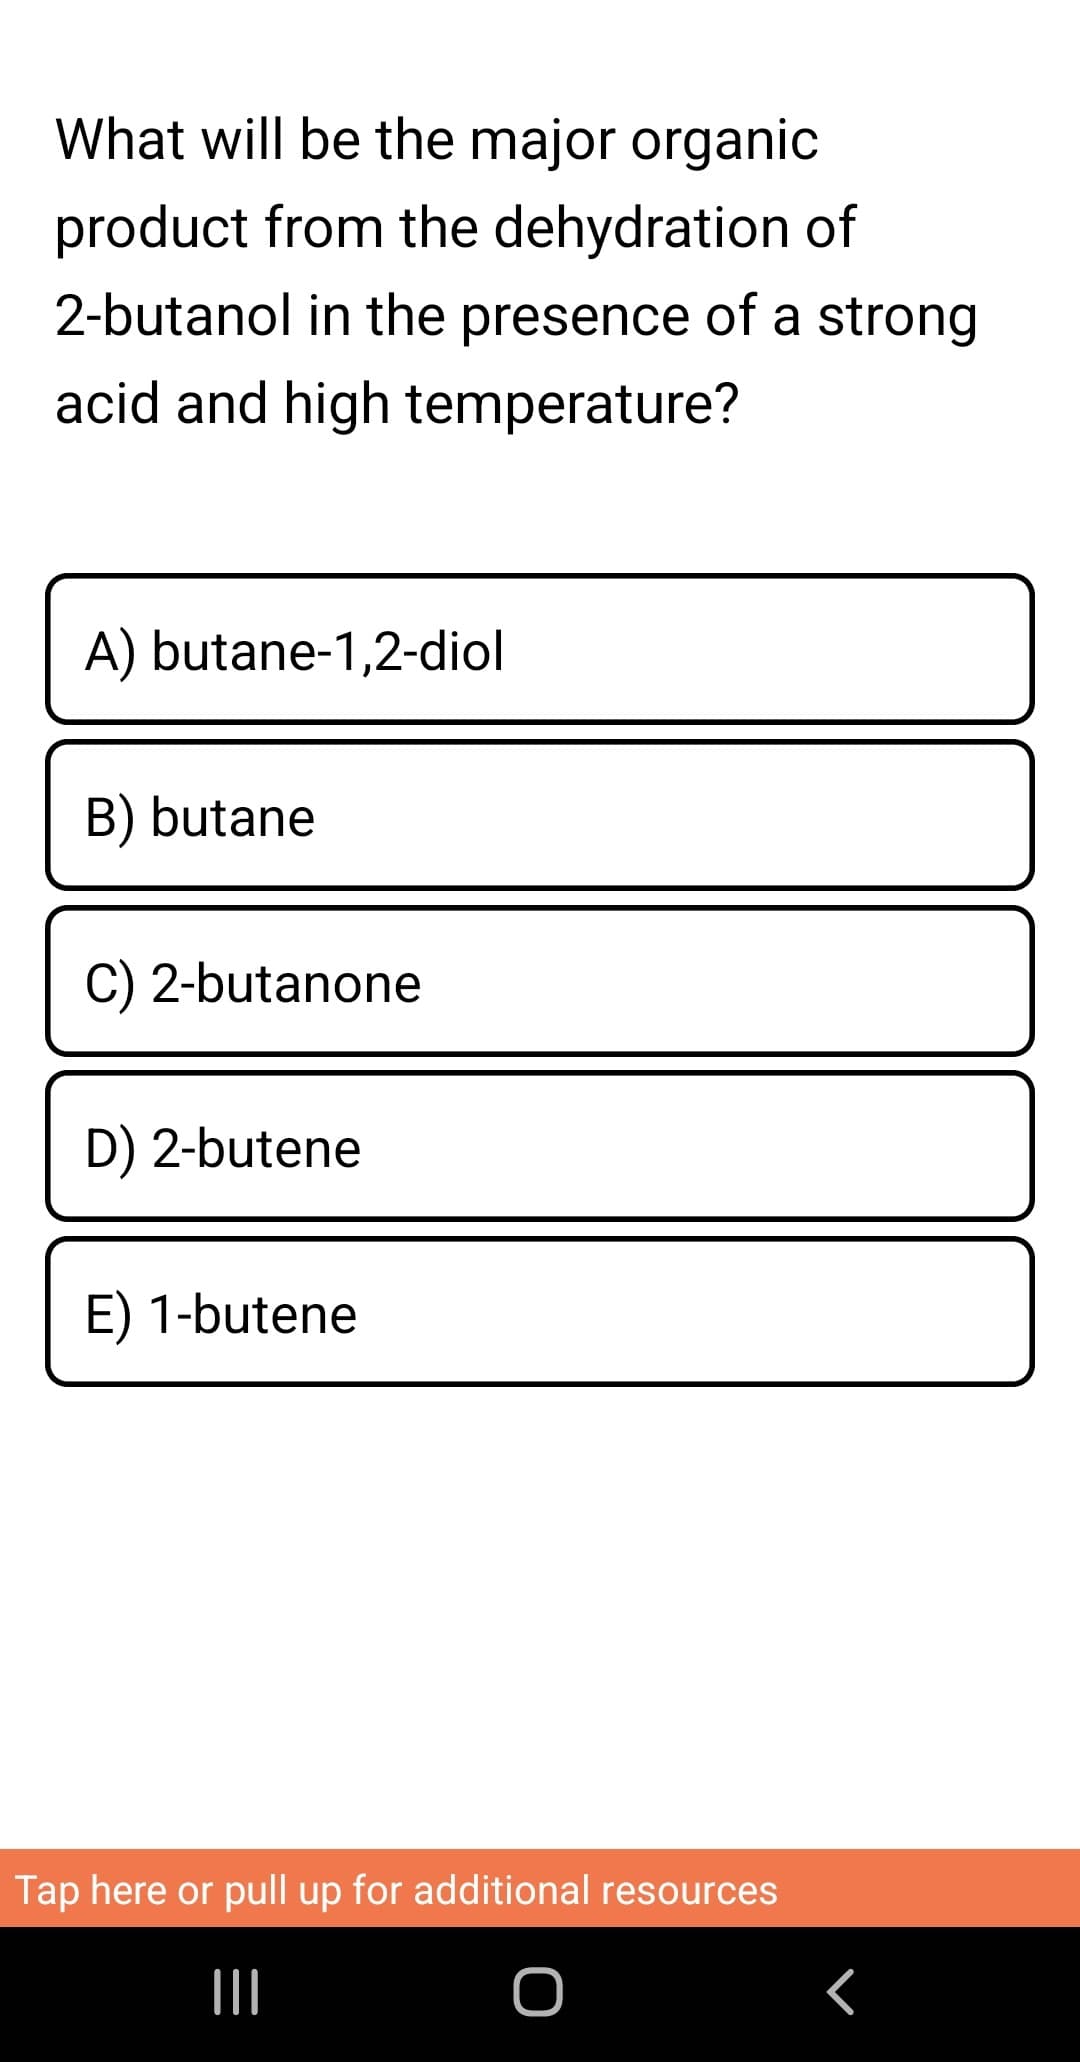 What will be the major organic
product from the dehydration of
2-butanol in the presence of a strong
acid and high temperature?
A) butane-1,2-diol
B) butane
C) 2-butanone
D) 2-butene
E) 1-butene
Tap here or pull up for additional resources
|||
O
<